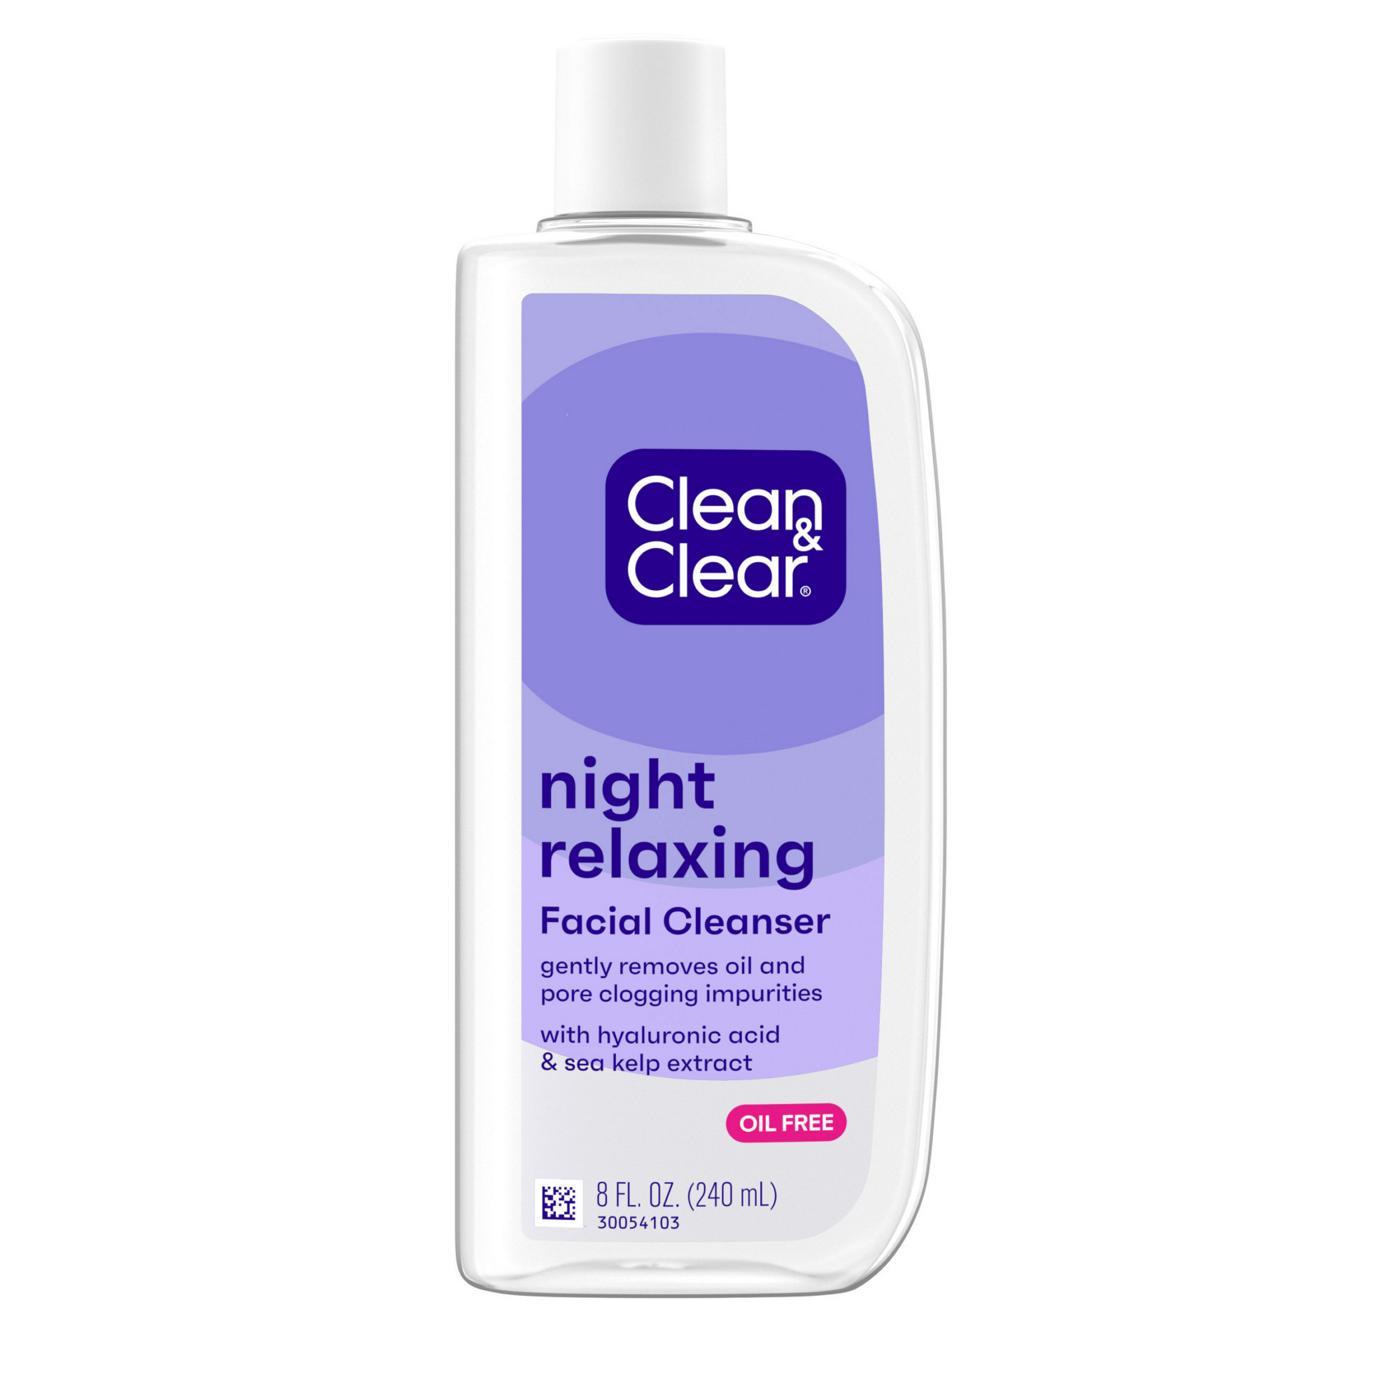 Clean & Clear Night Relaxing Deep Cleaning Face Wash; image 1 of 8